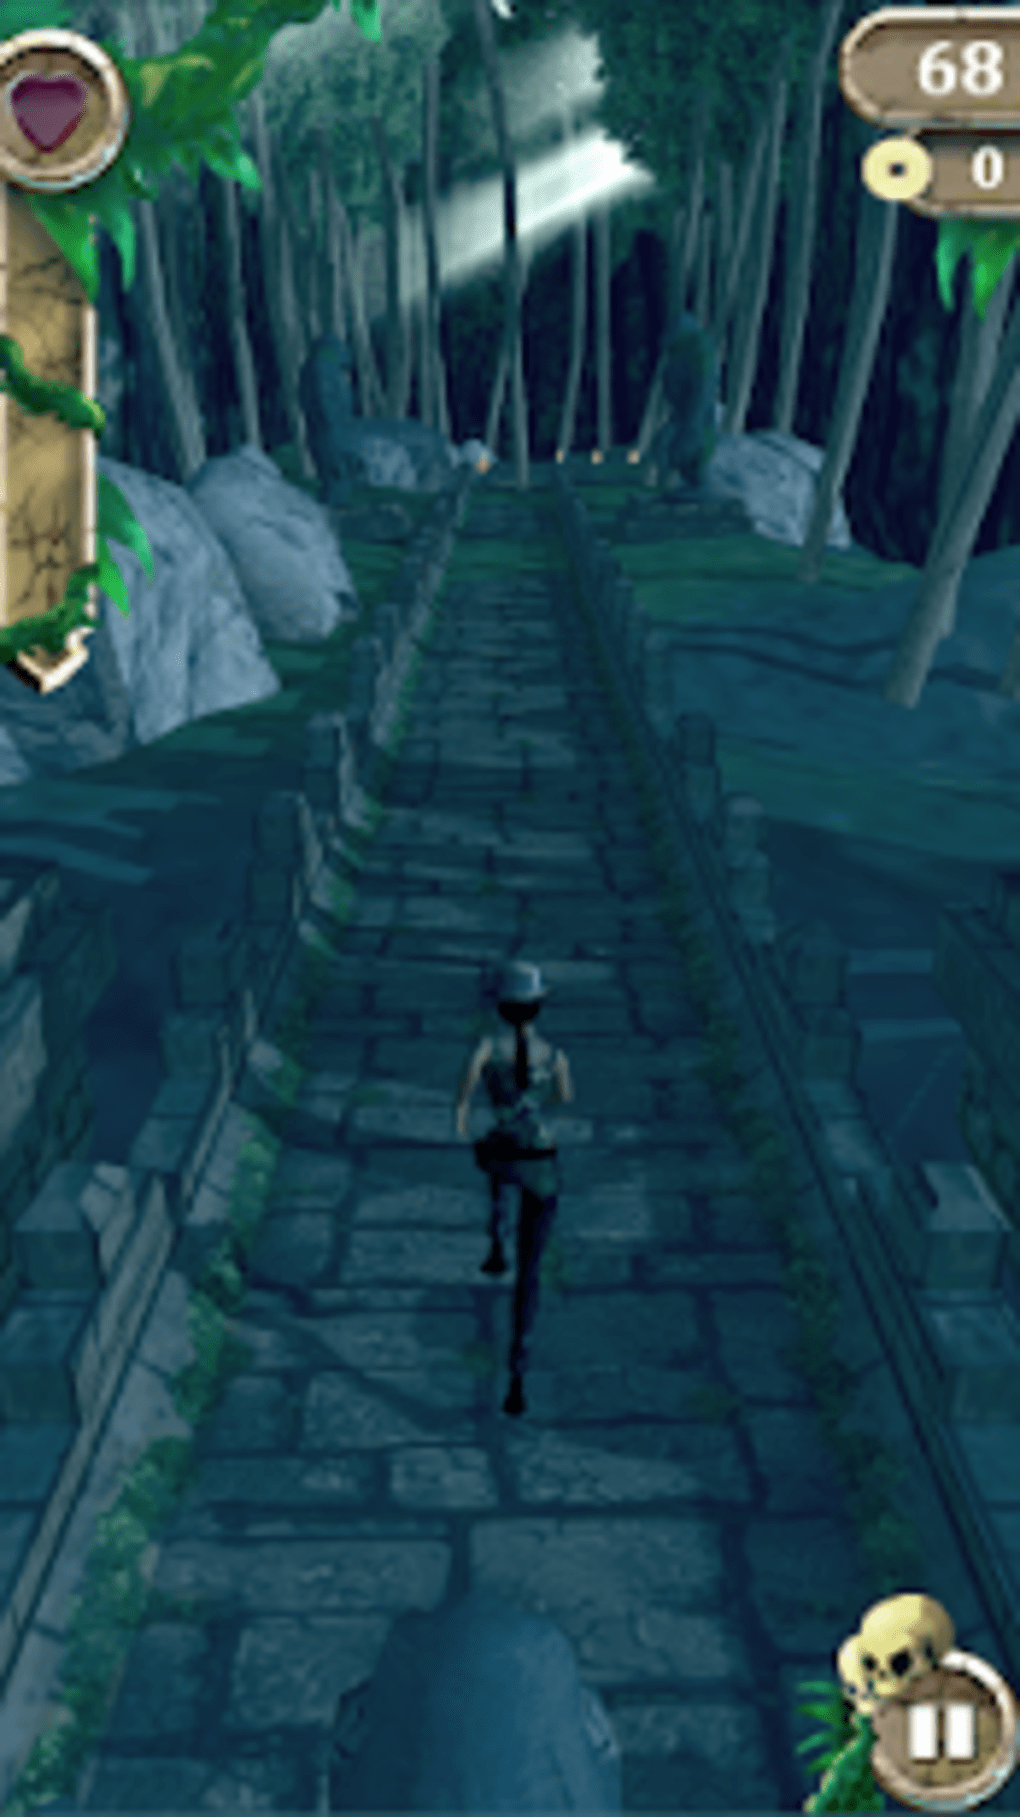 Temple Run 2 - Tomb Runner Online – Play Free in Browser 